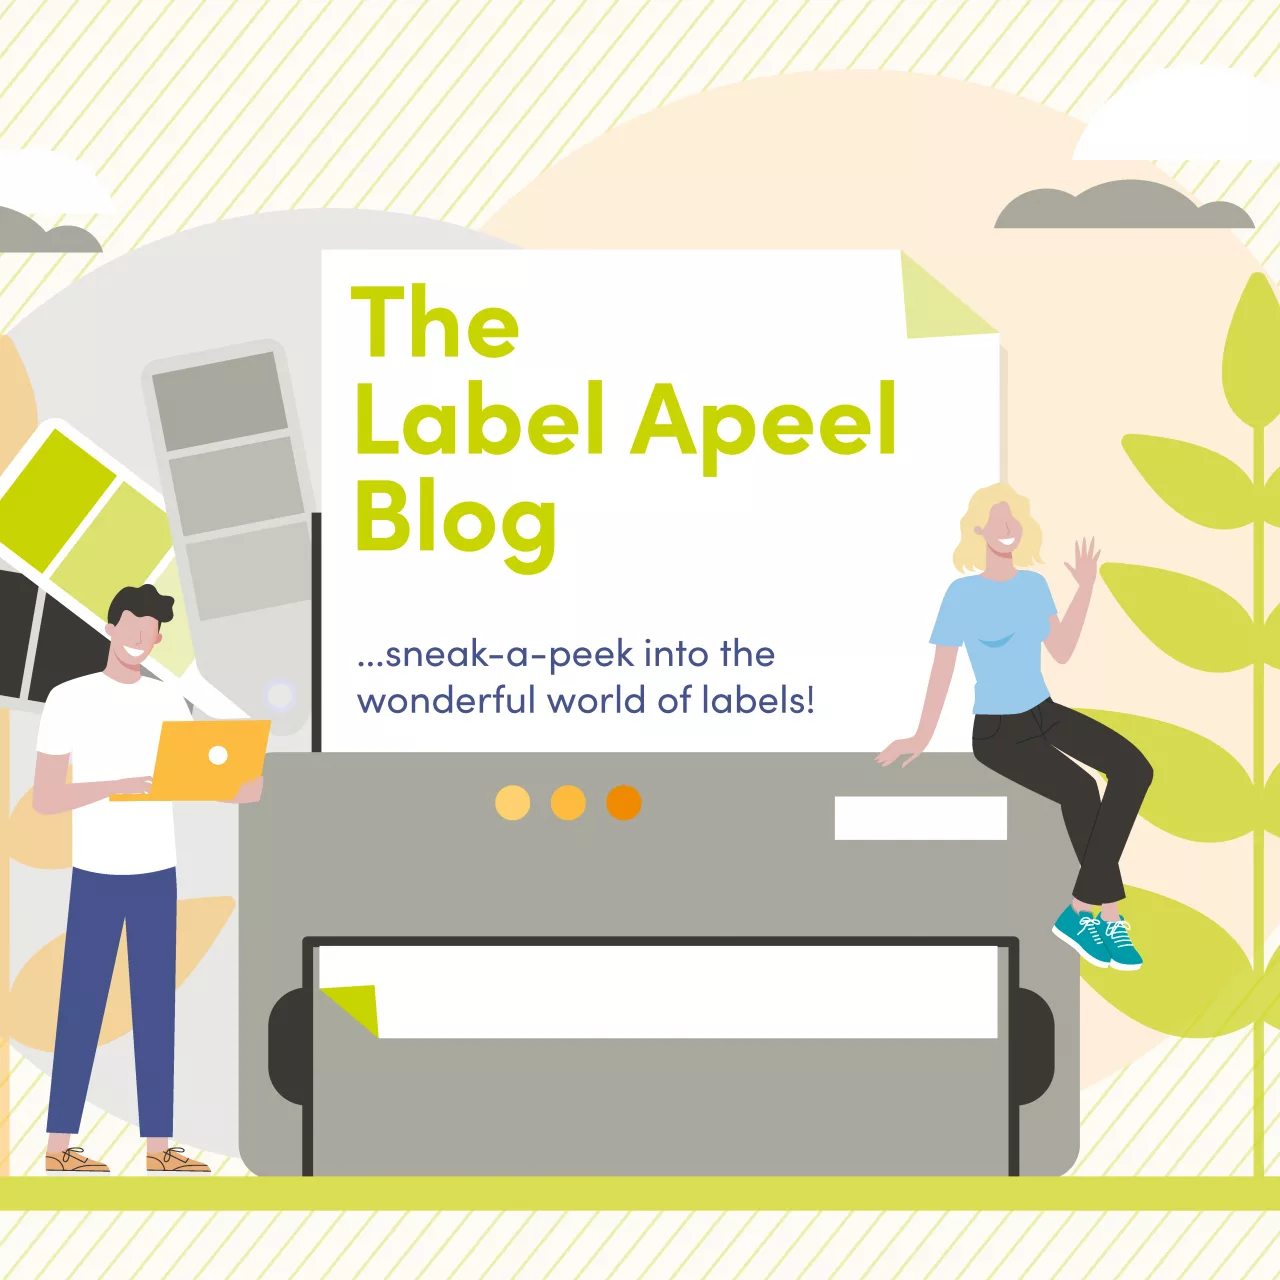 Sustainability at Label Apeel